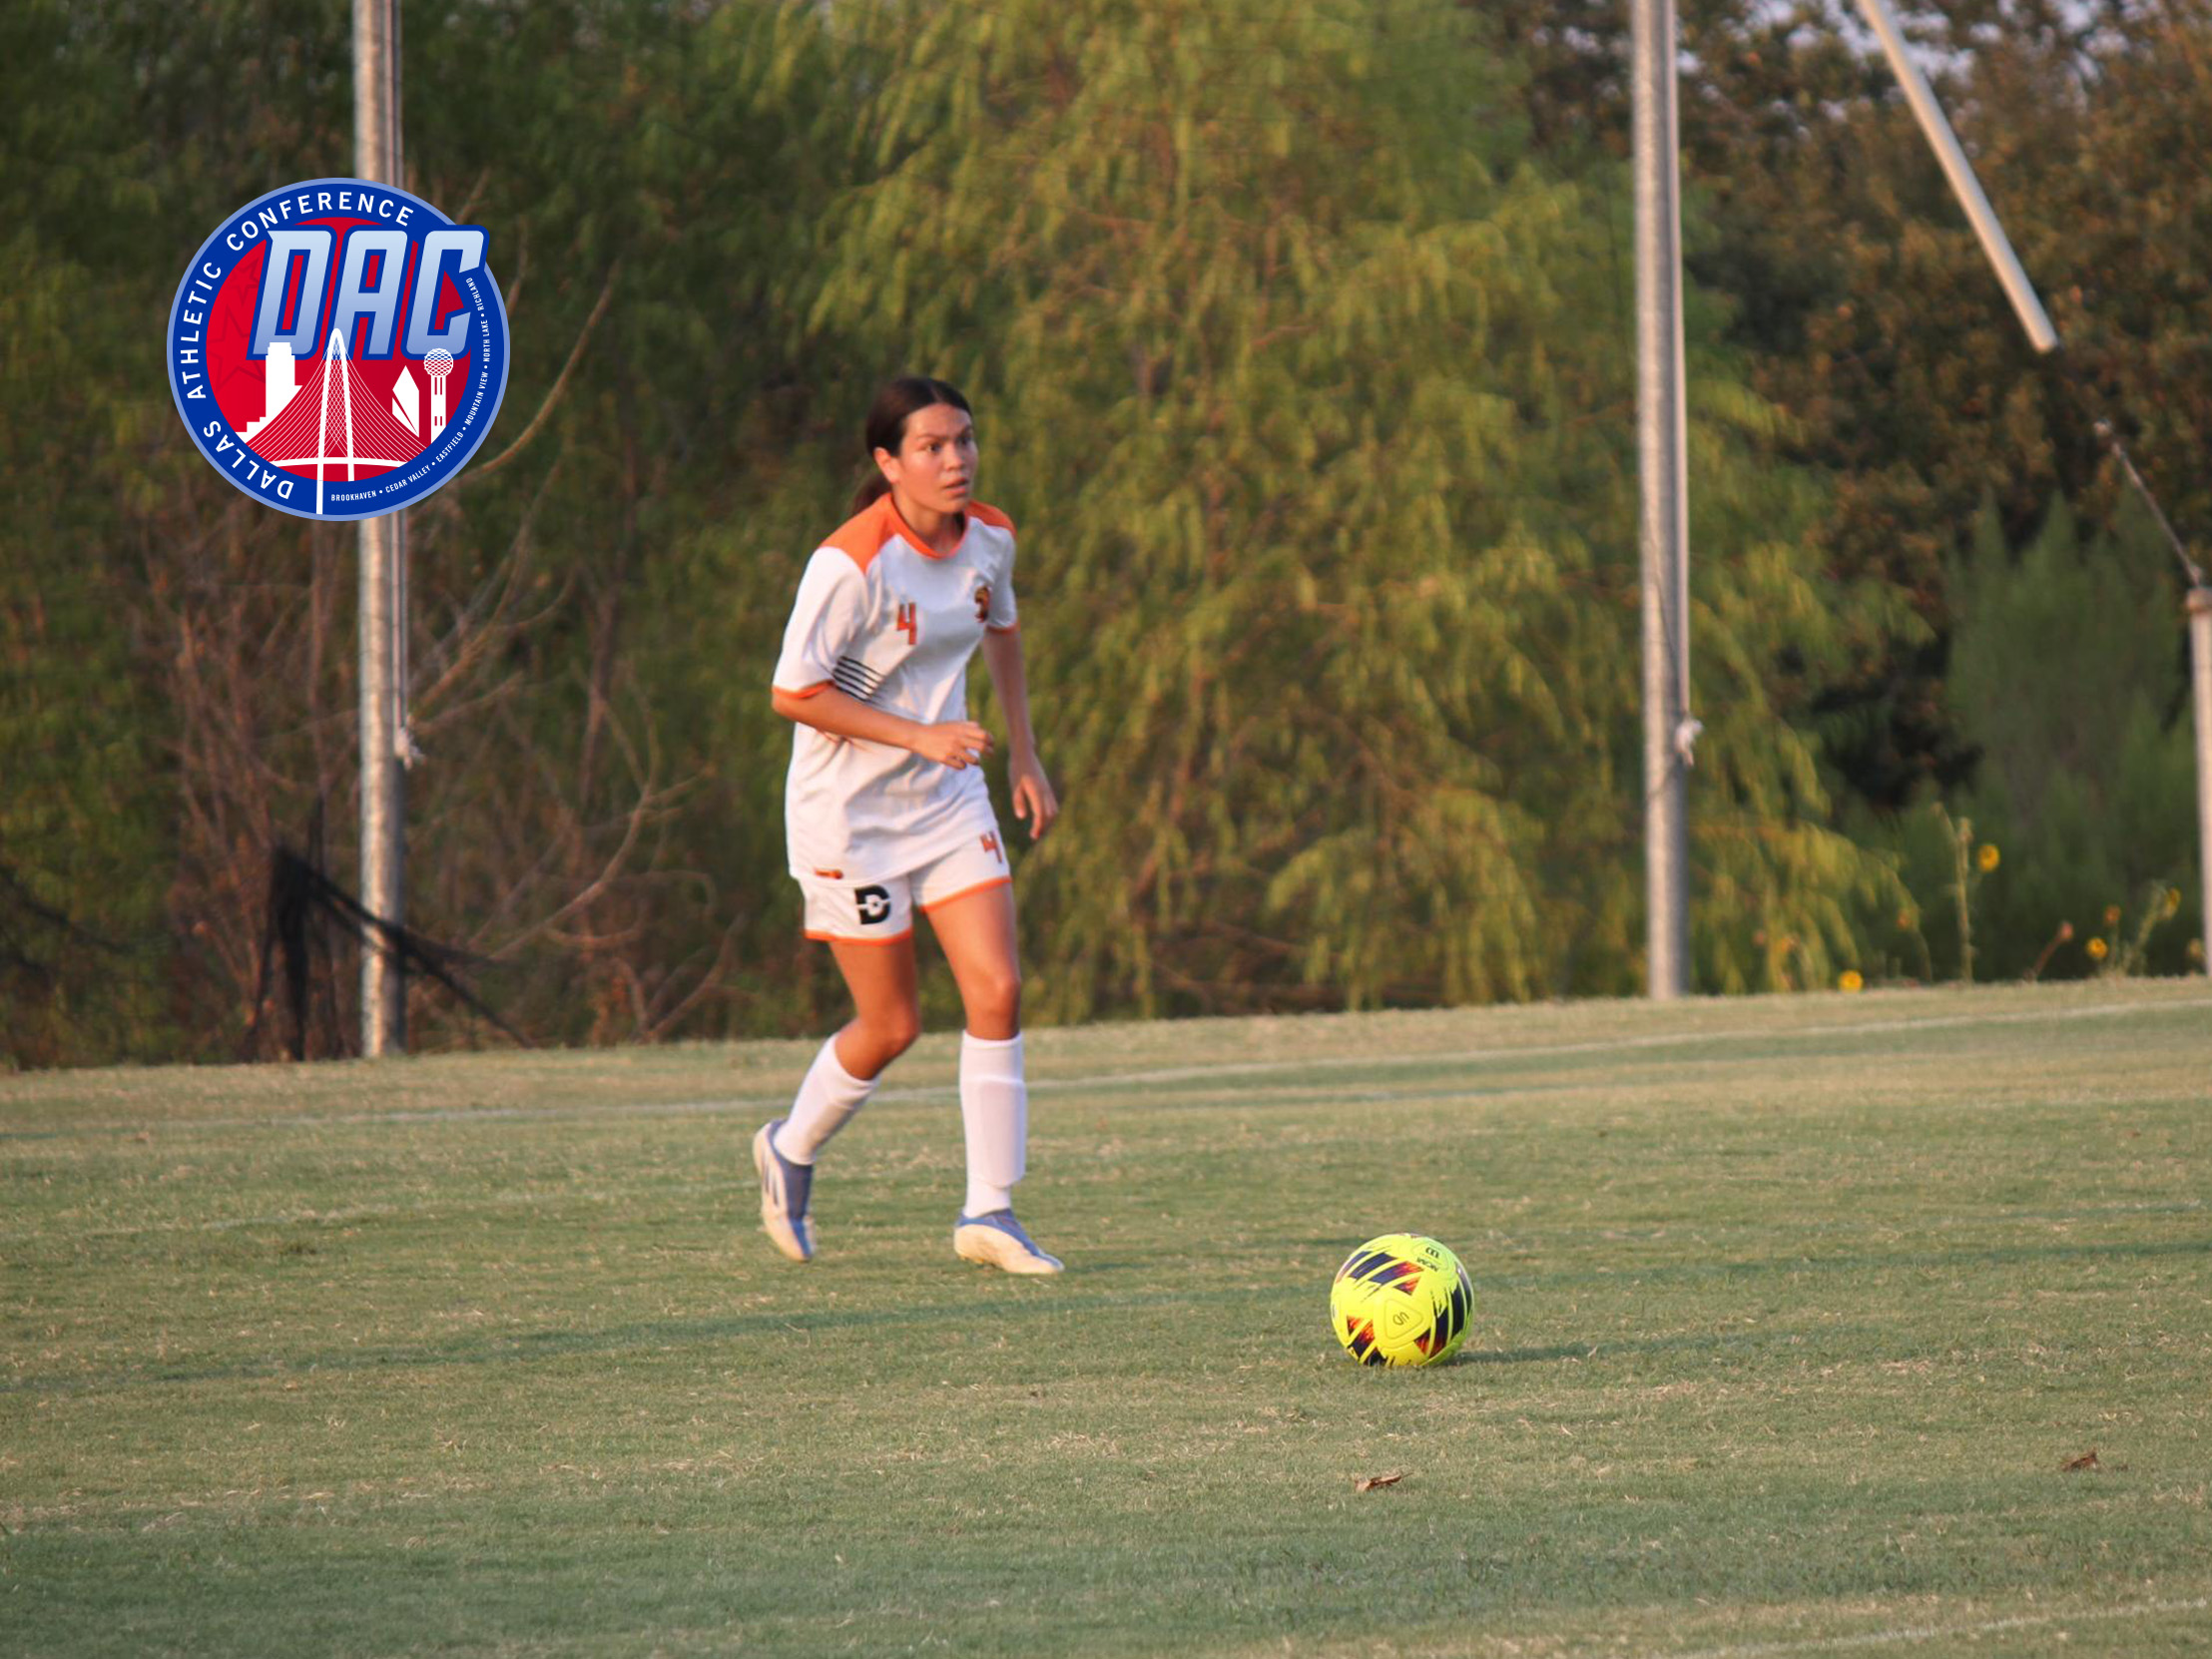 Puente Named DAC Player of Week